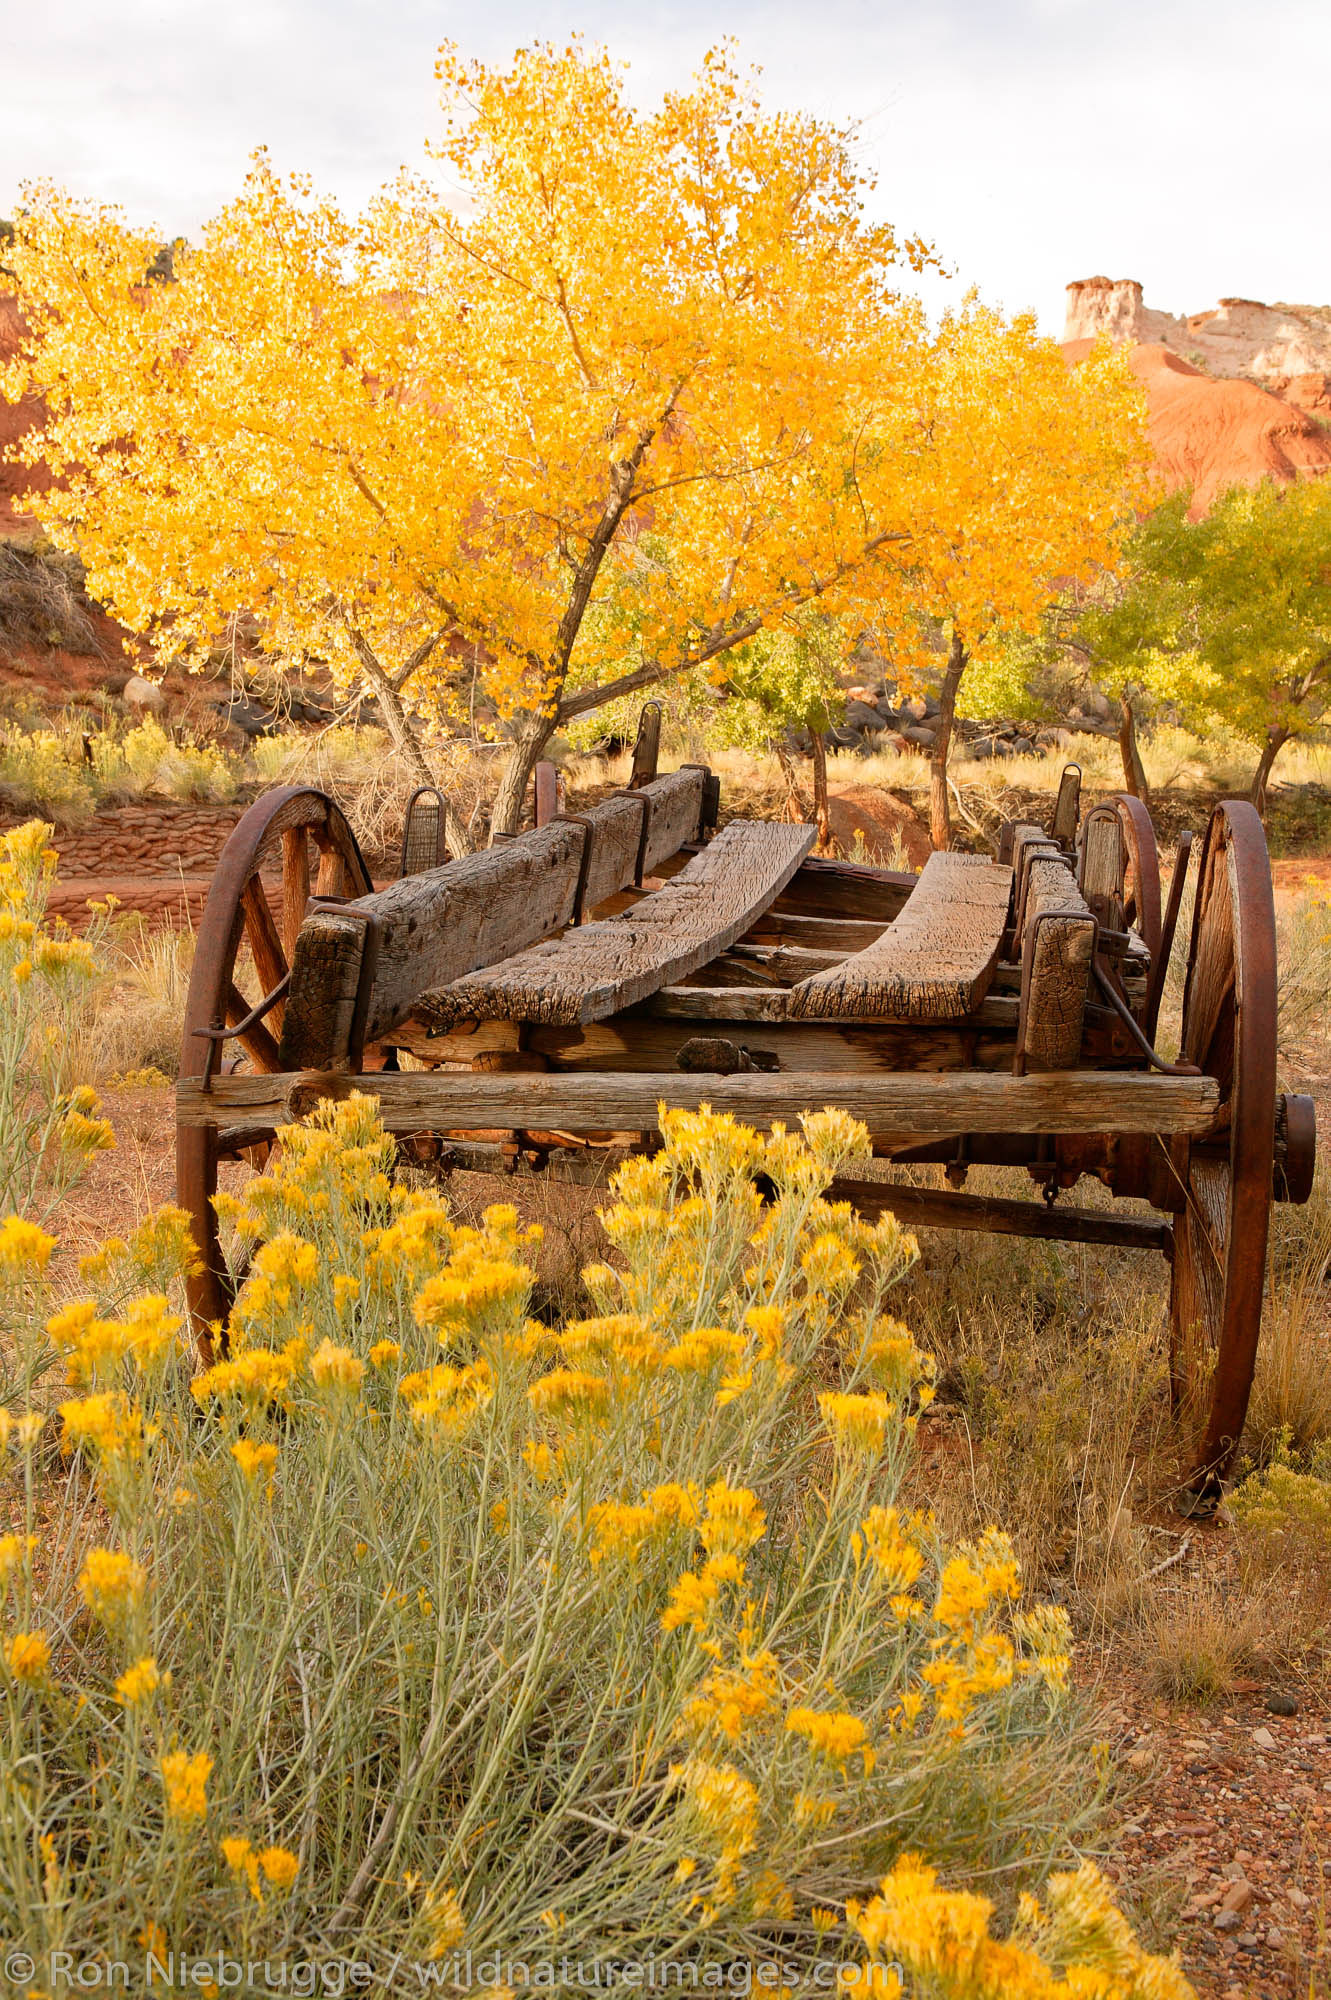 Historic farm equimpment in the old Mormon community of Fruita which was known for its apple orchards, Capital Reef National...